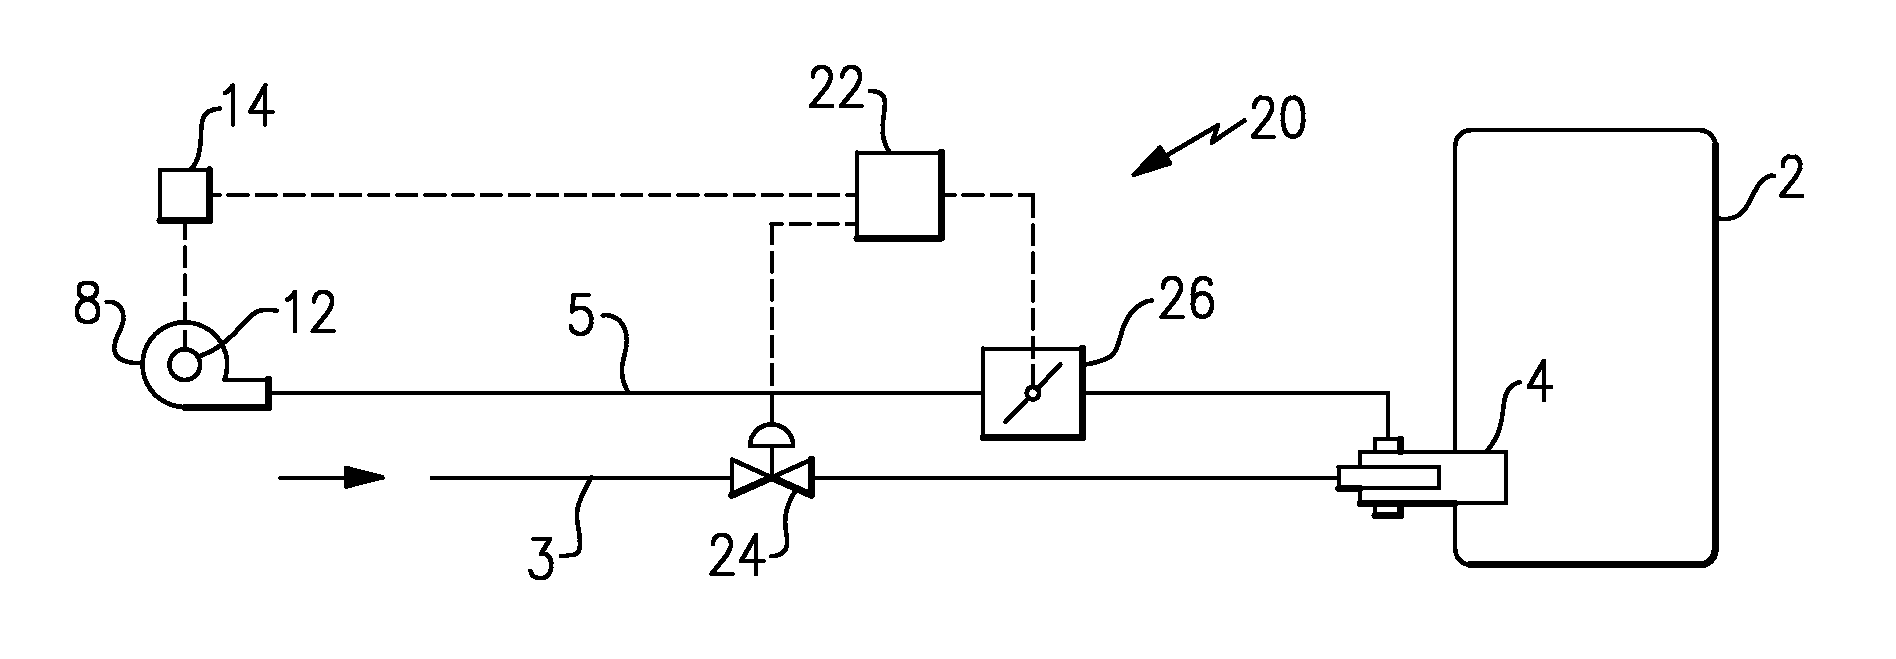 Automated setup process for metered combustion control systems